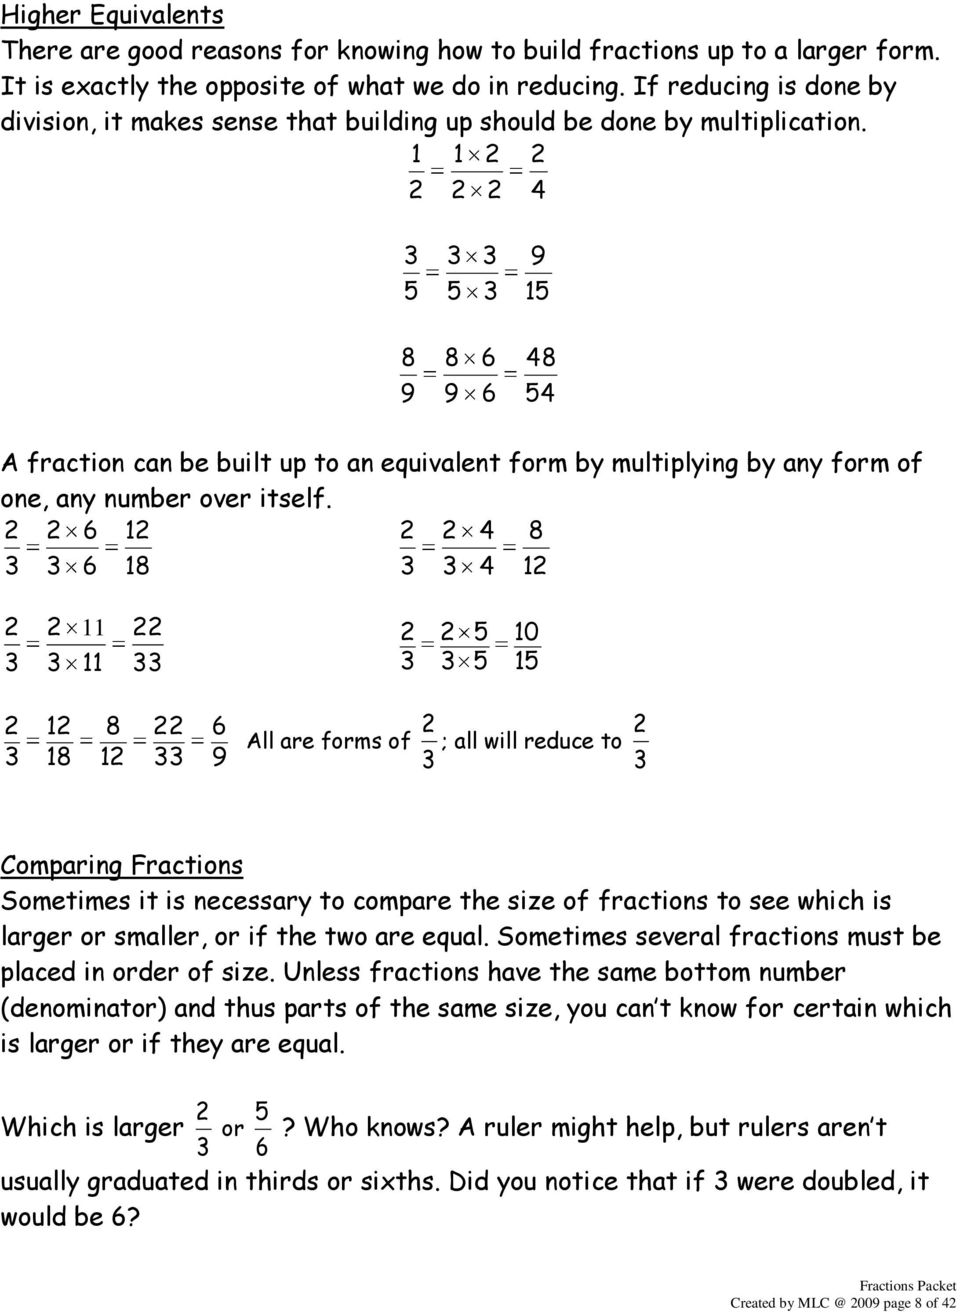 A fraction can be built up to an equivalent form by multiplying by any form of one any number over itself.